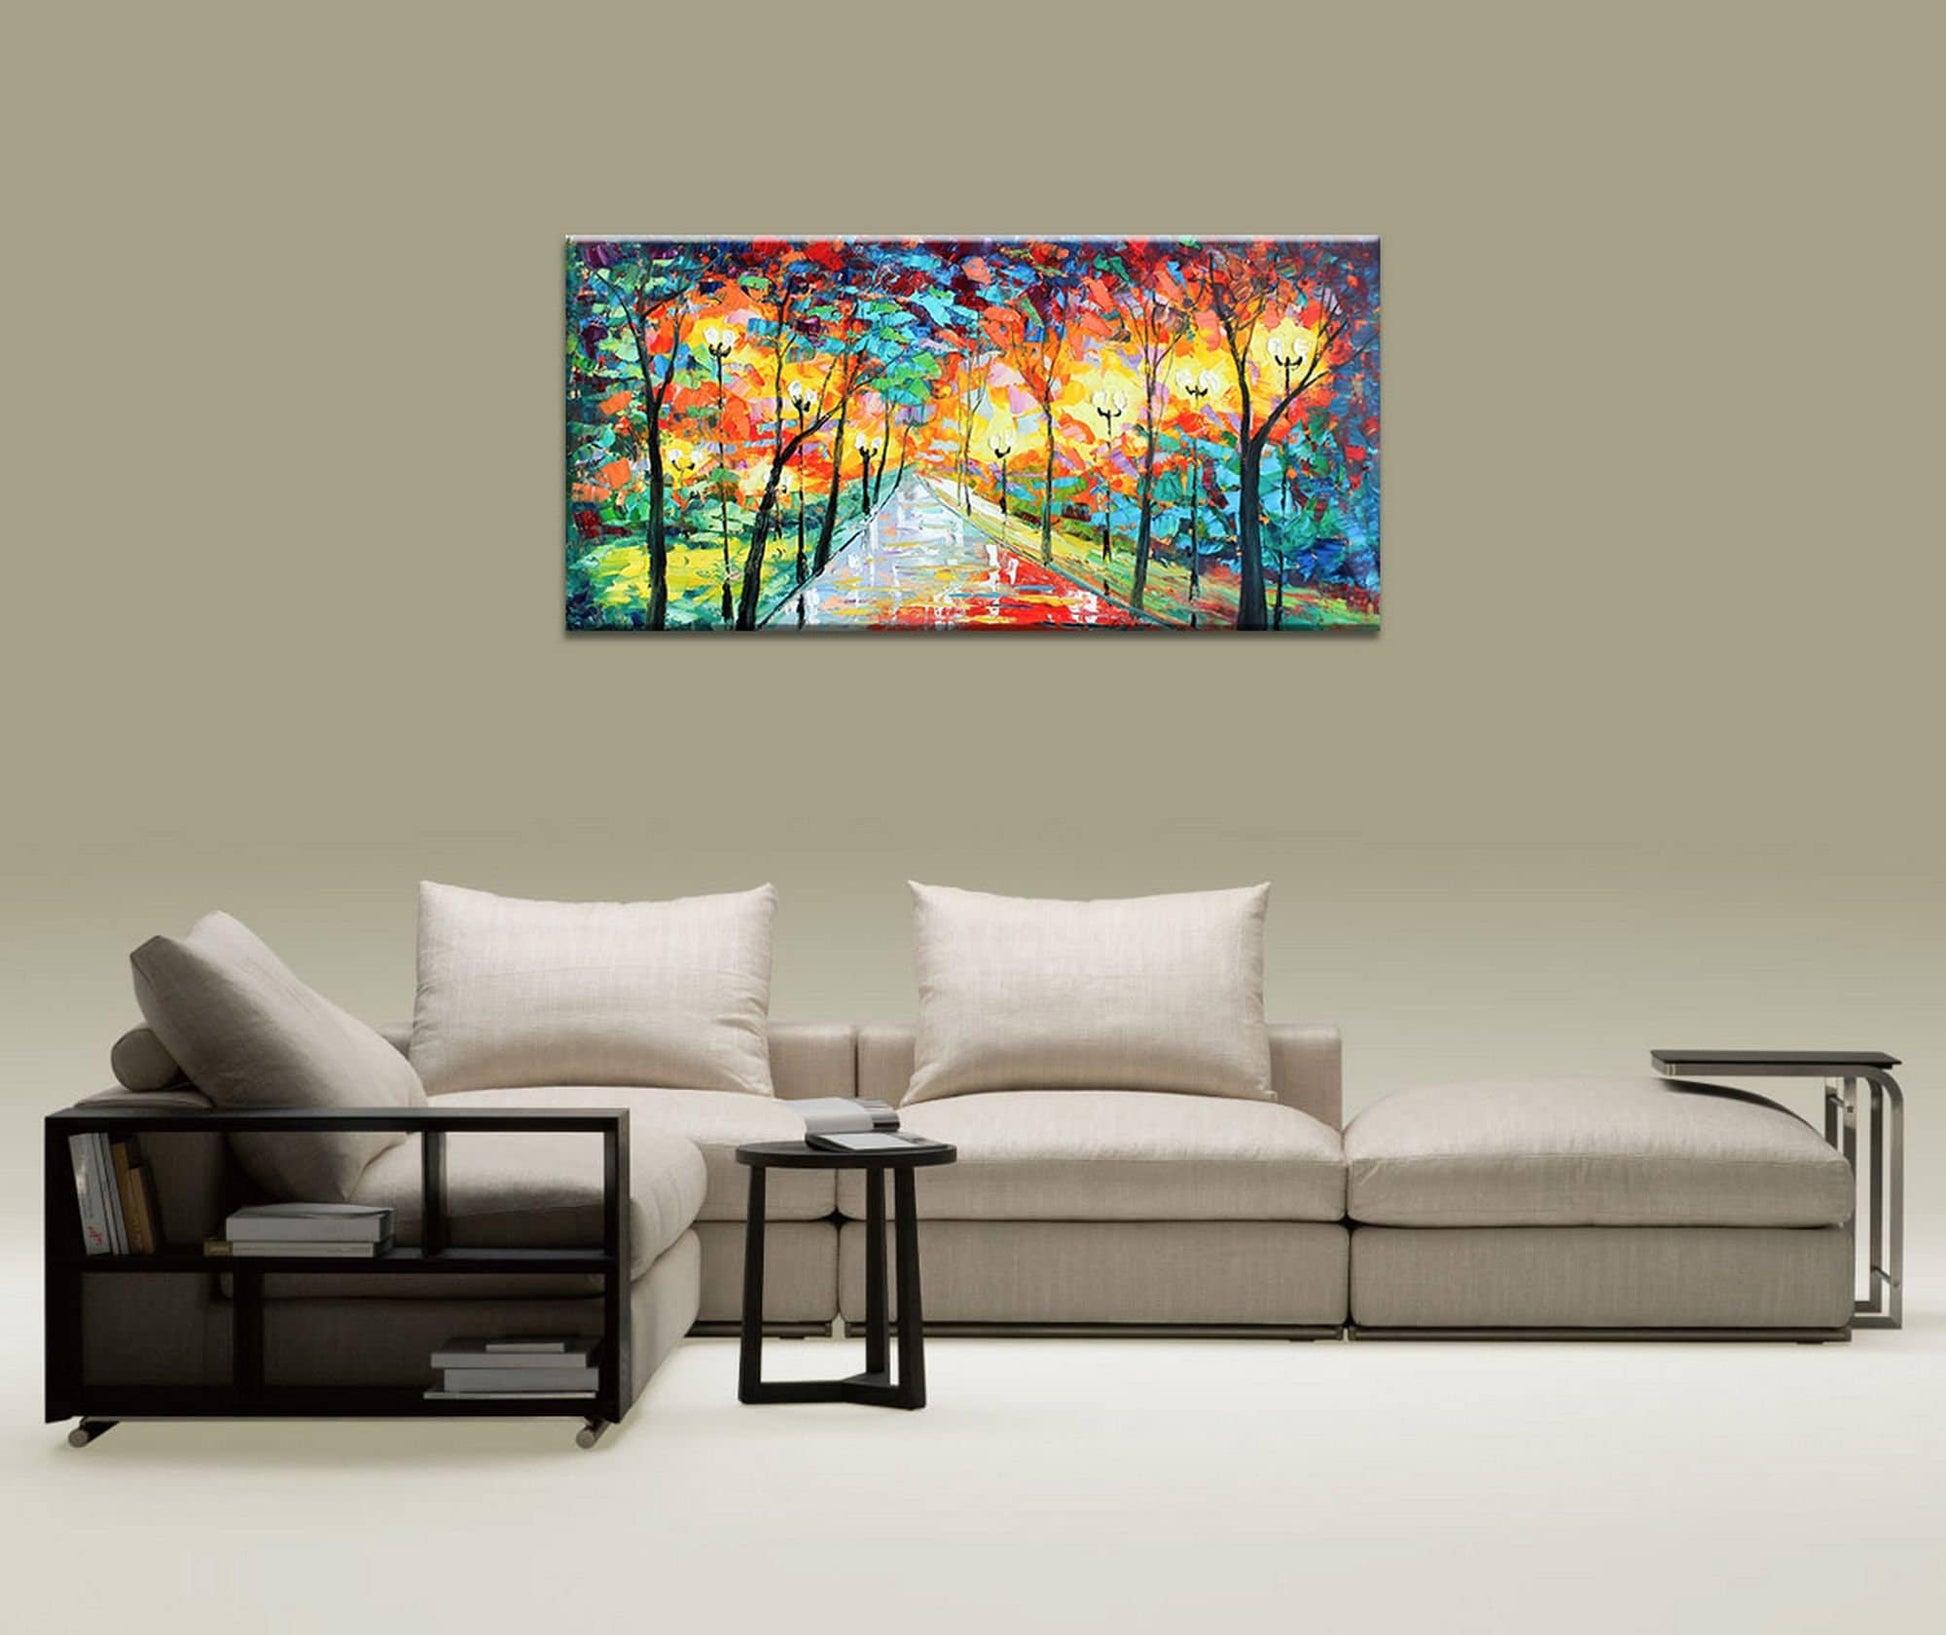 Oil Painting Landscape, Painting Abstract, Abstract Wall Art, Large Abstract Painting, Original Abstract Painting, Wall Decor, Contemporary